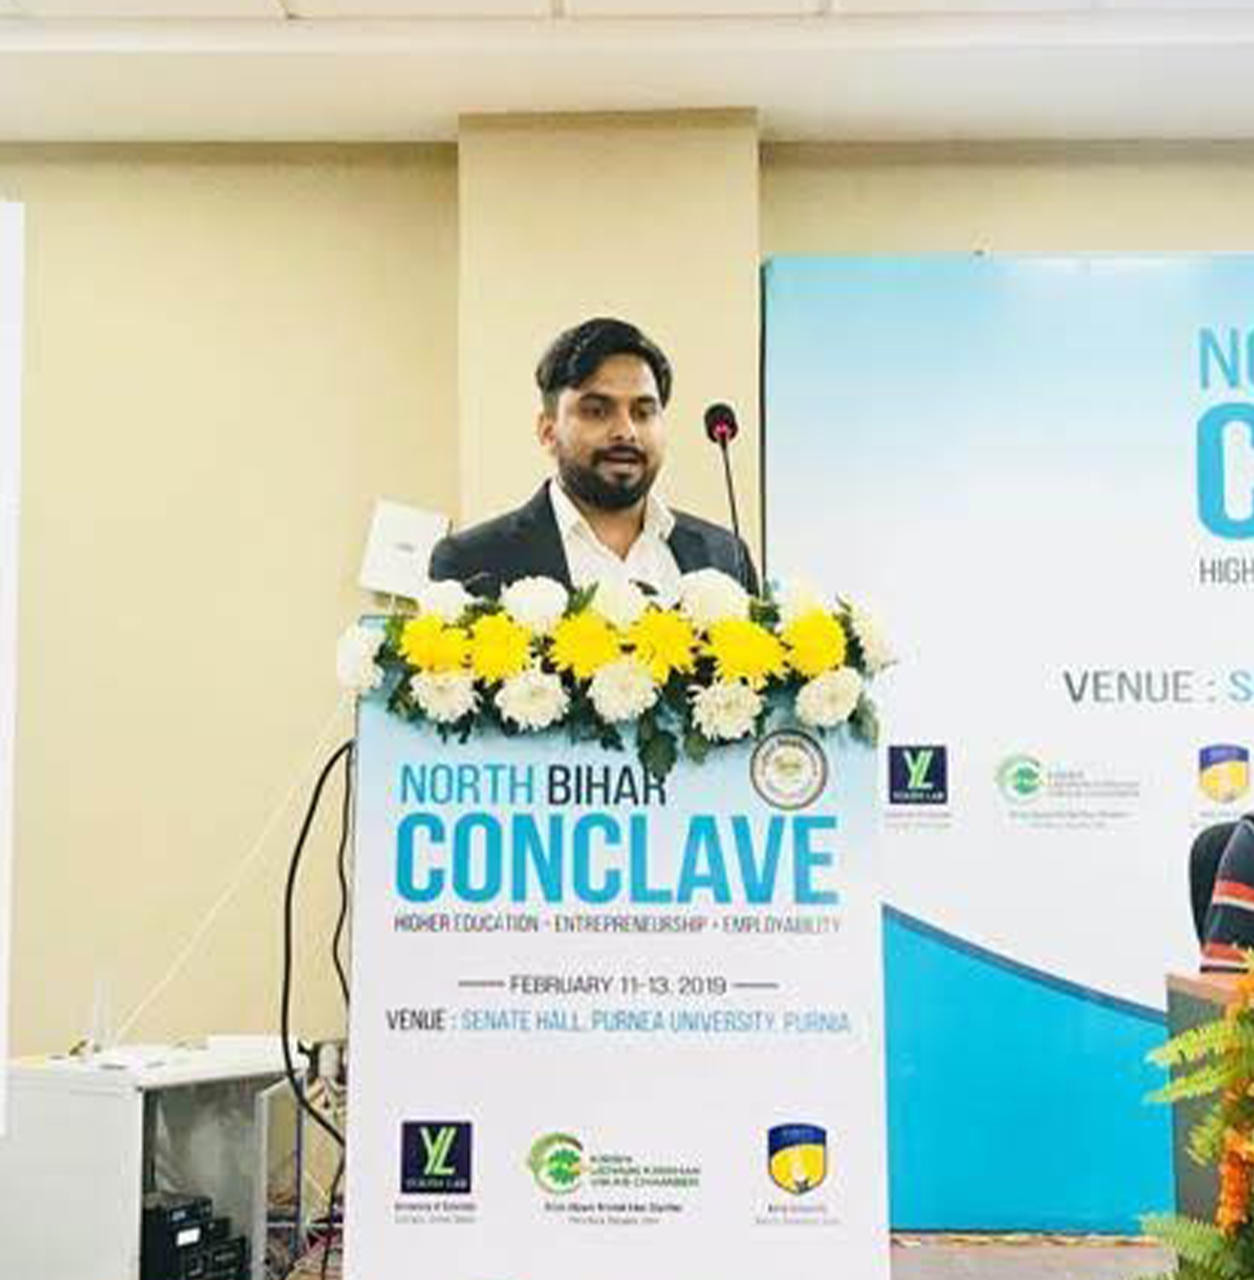 Lecture on North bihar conclave